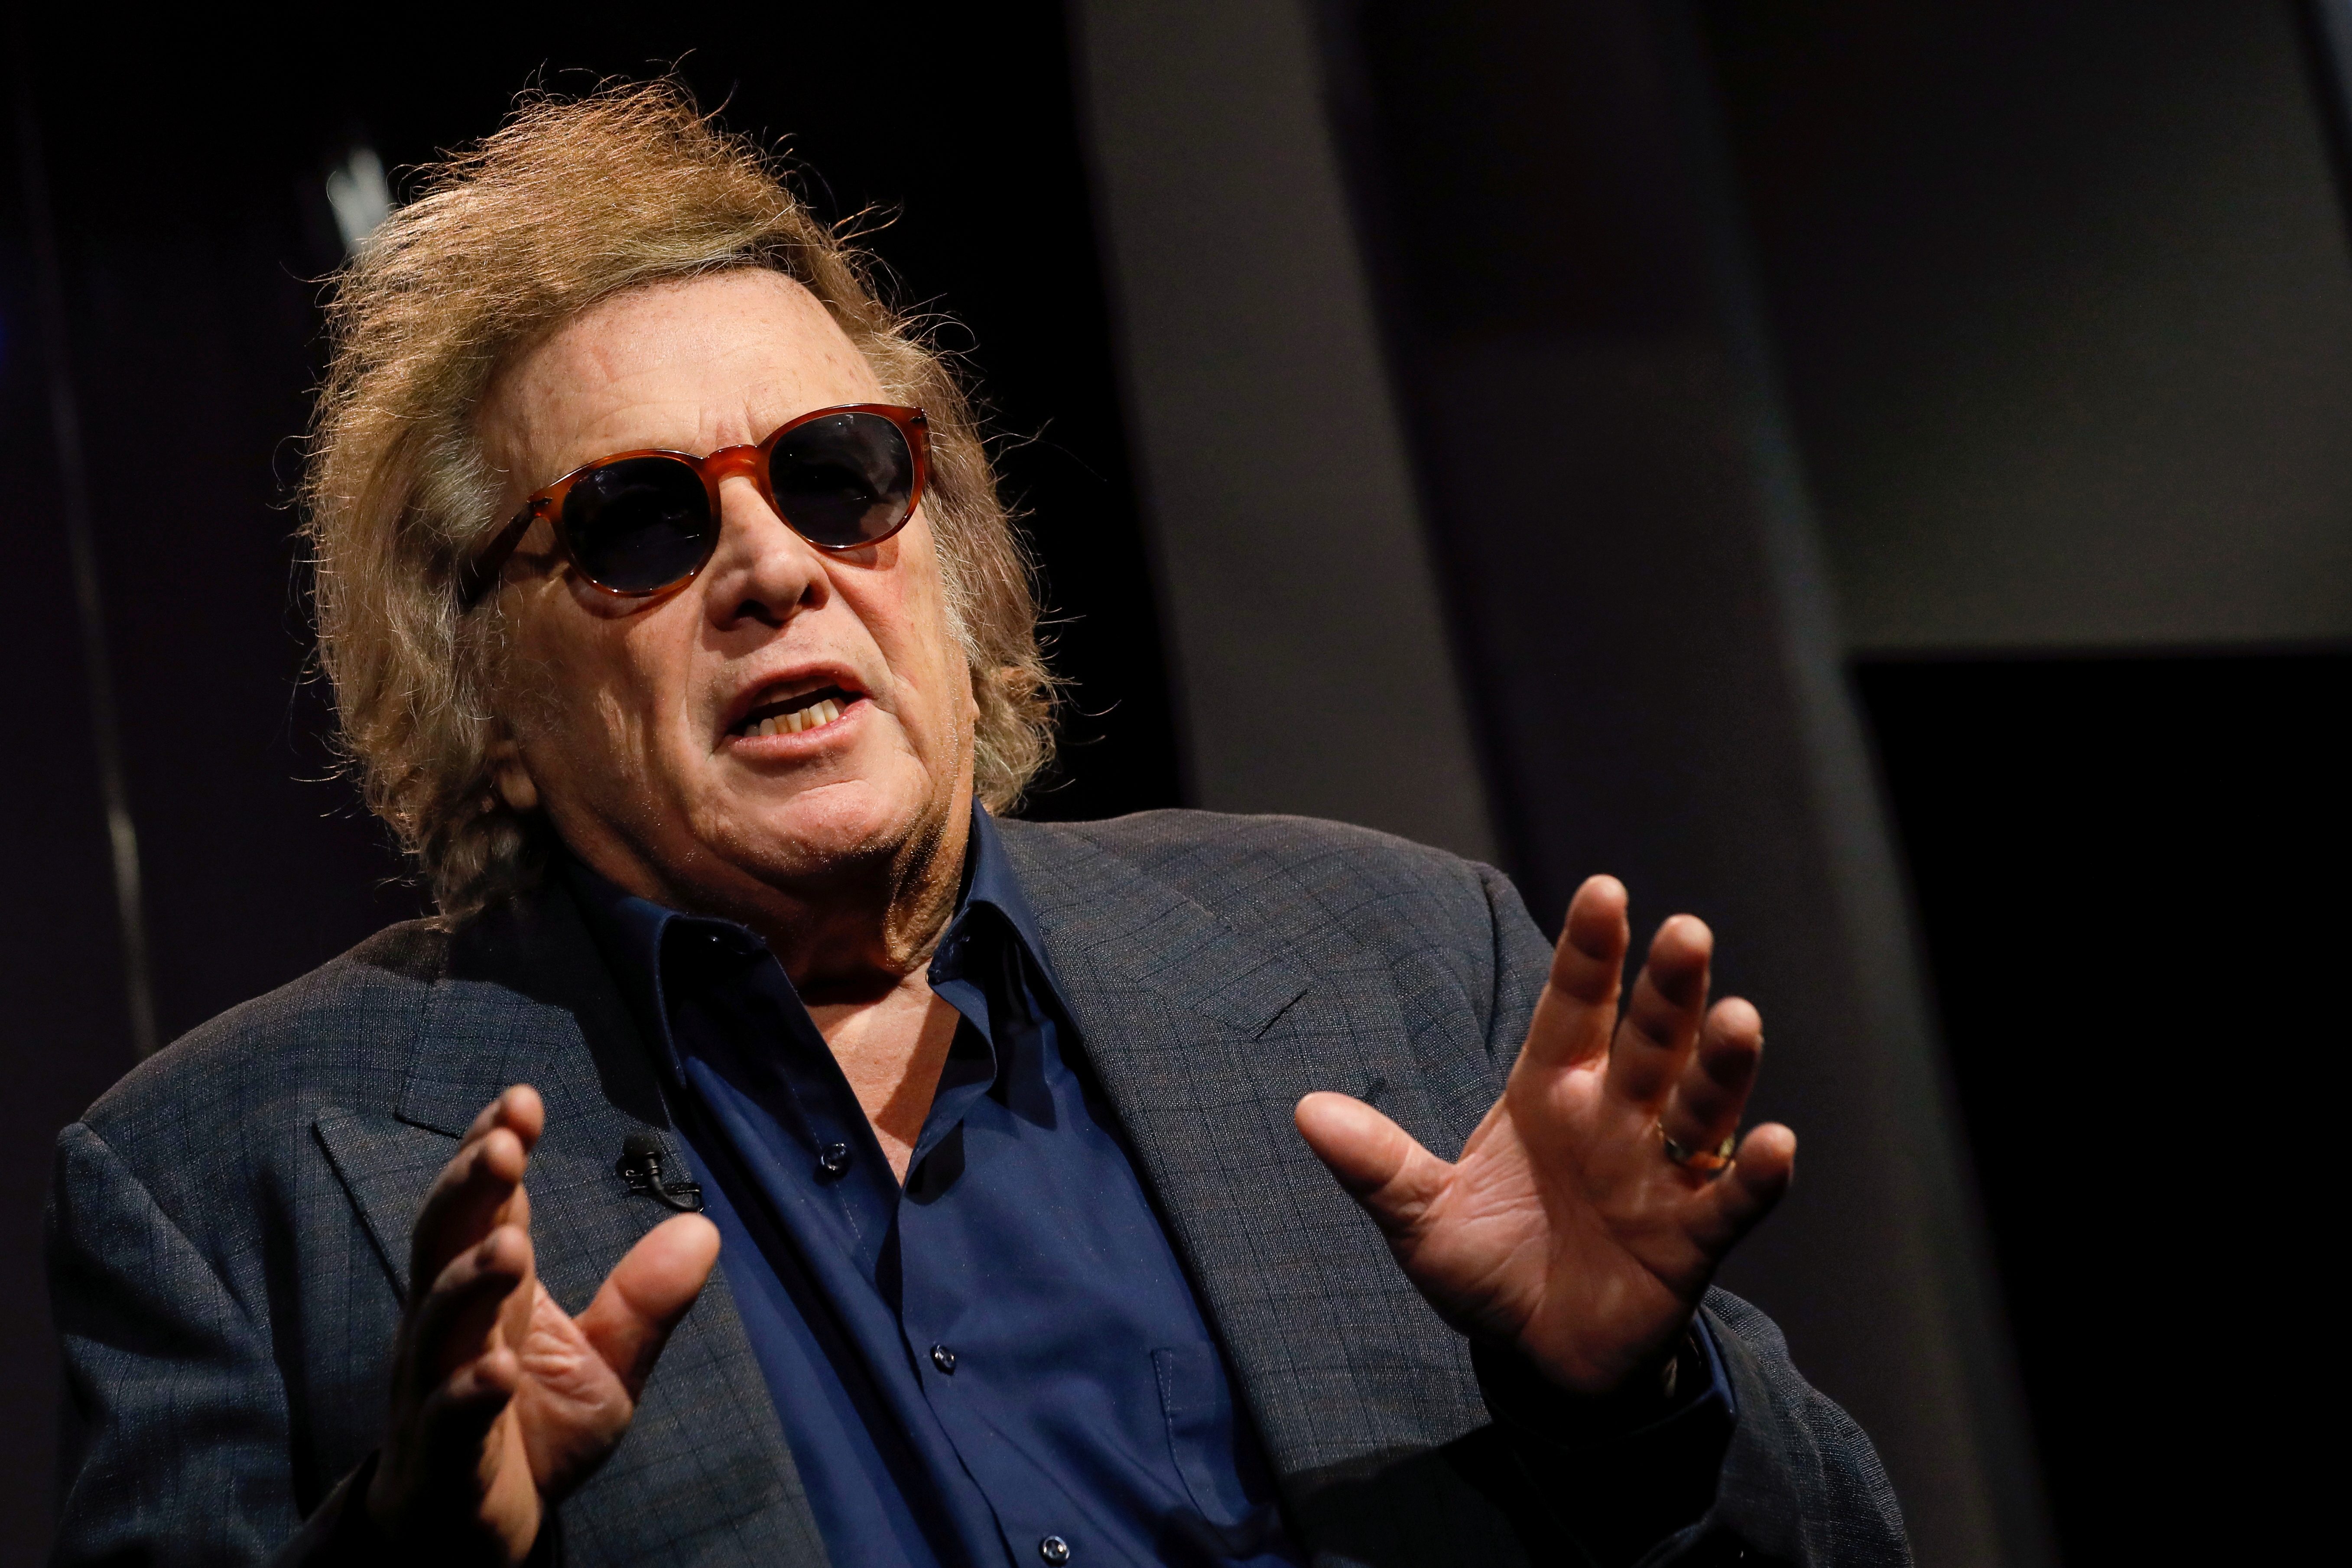 Don McLean gets Hollywood star as ‘American Pie’ hits 50